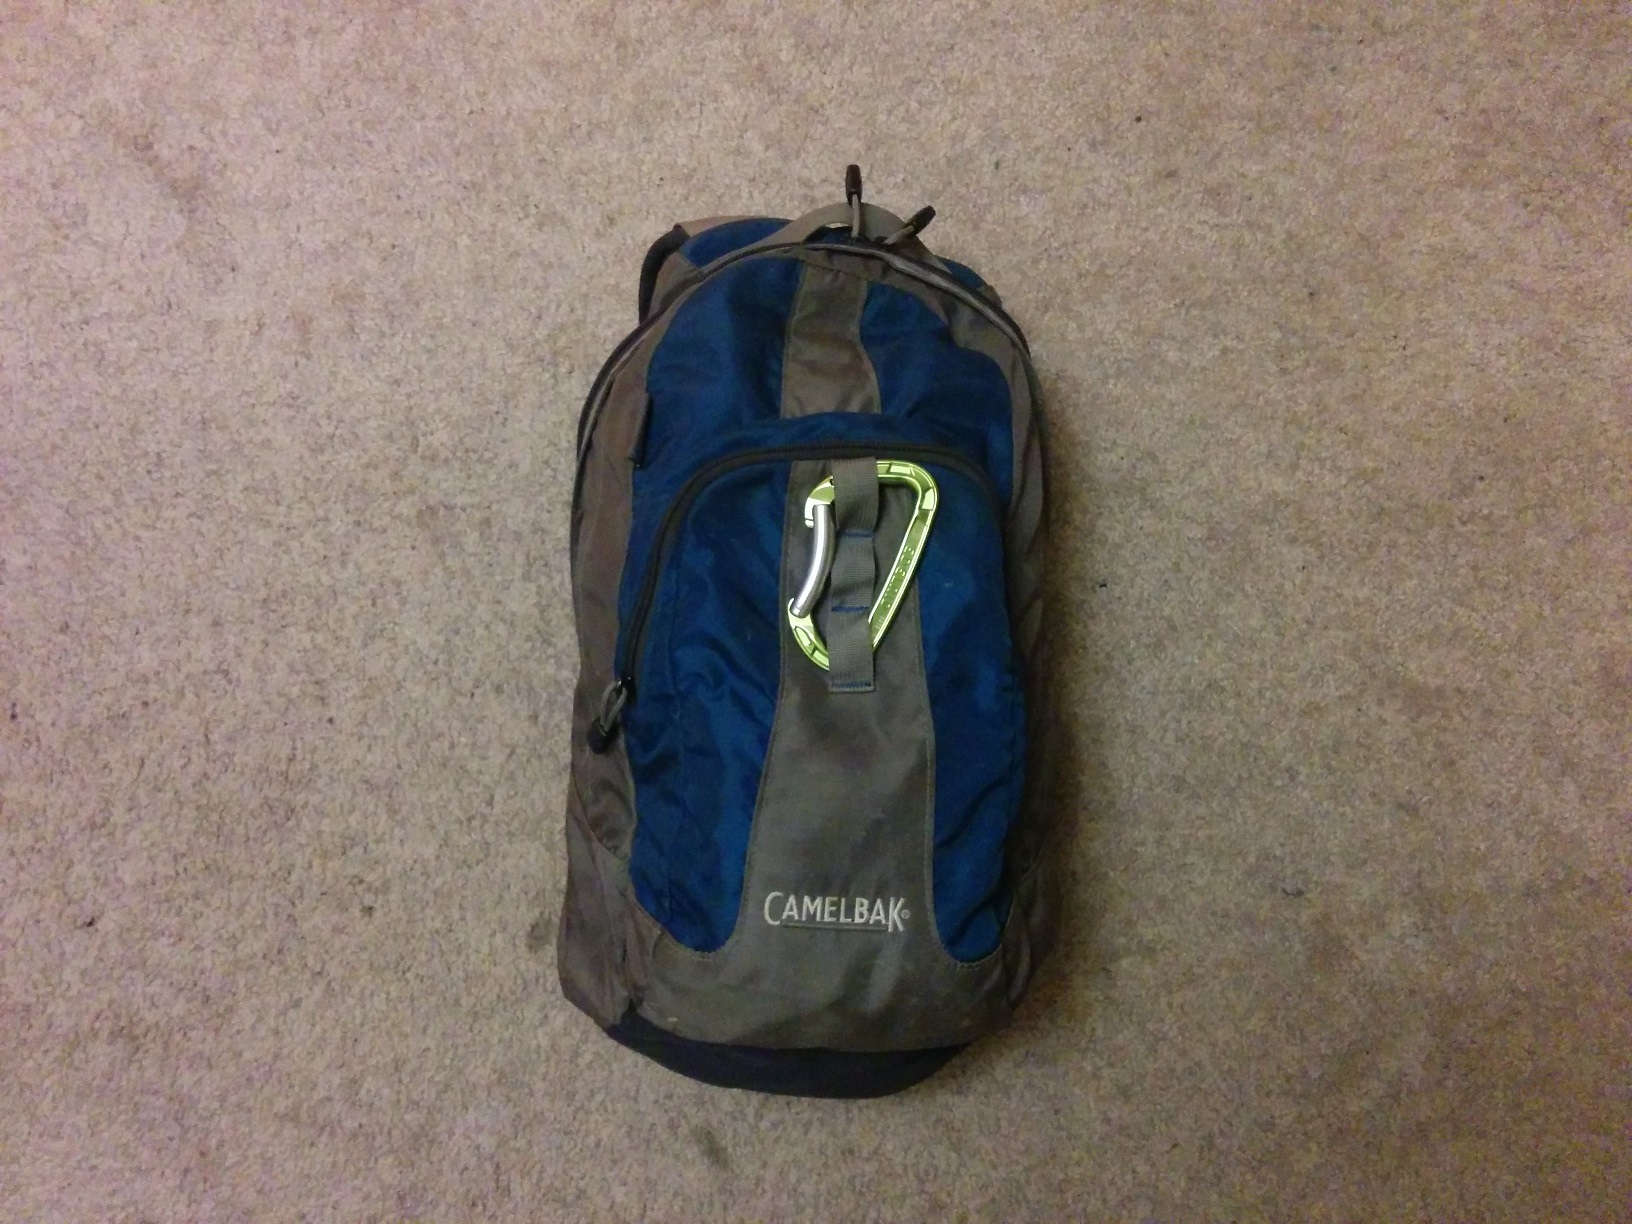 A blue and grey backpack laying on an offwhite carpet, with a green mountaineering caribiner clipped to the outside.